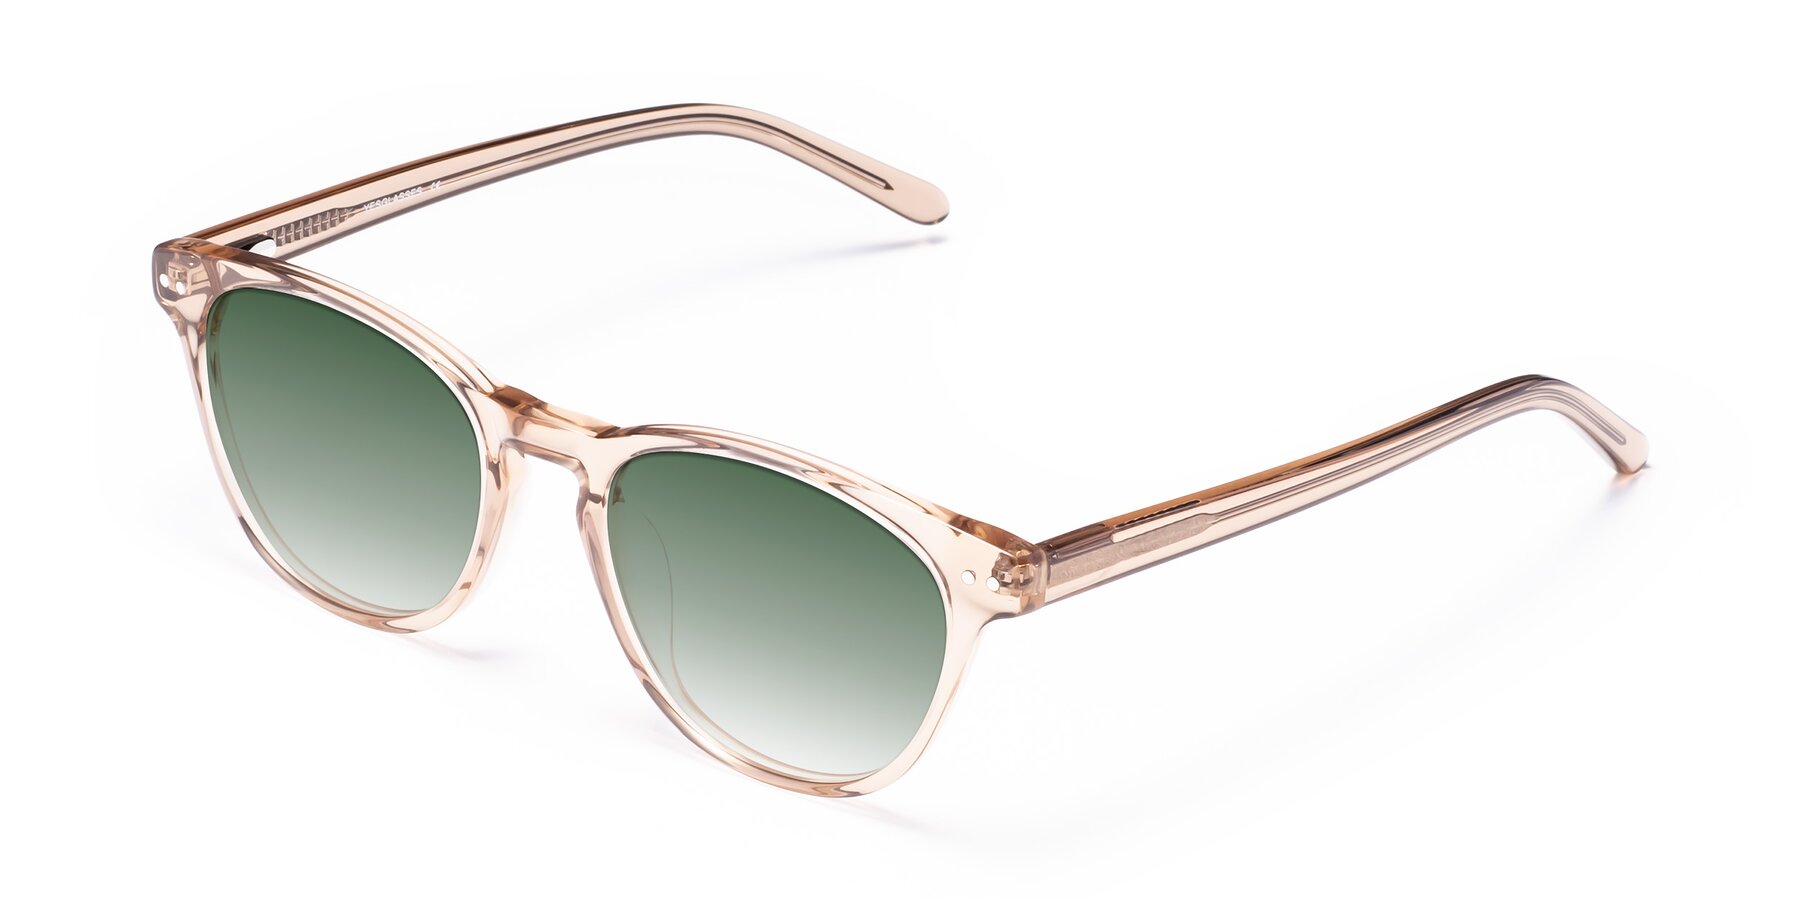 Angle of Blaze in light Brown with Green Gradient Lenses